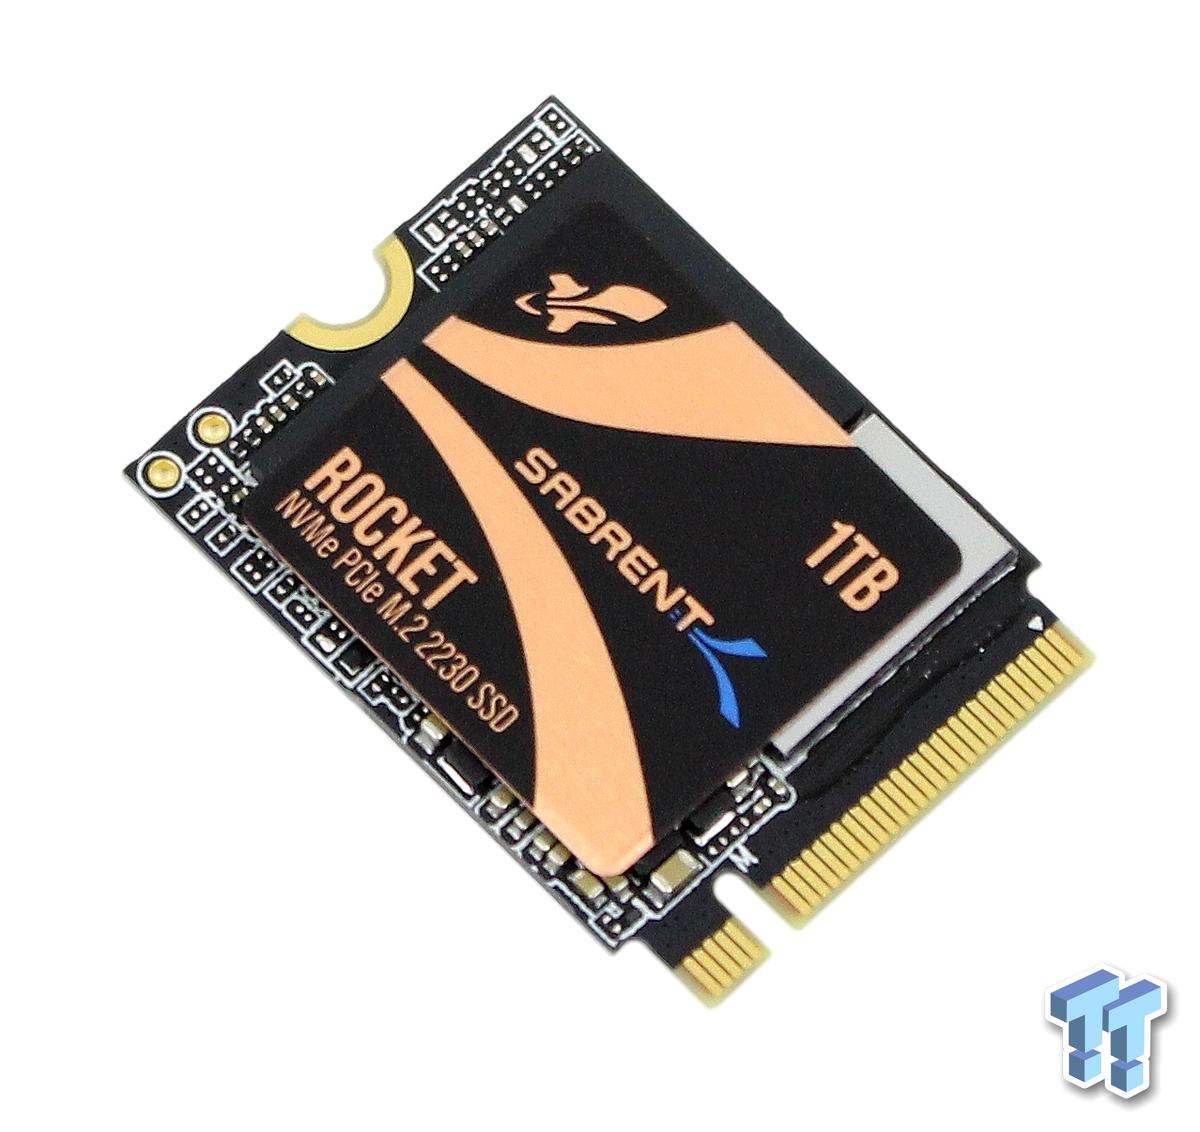 1TB Performance Results - Sabrent Rocket 2230 SSD Review: Tiny Powerhouse -  Page 2